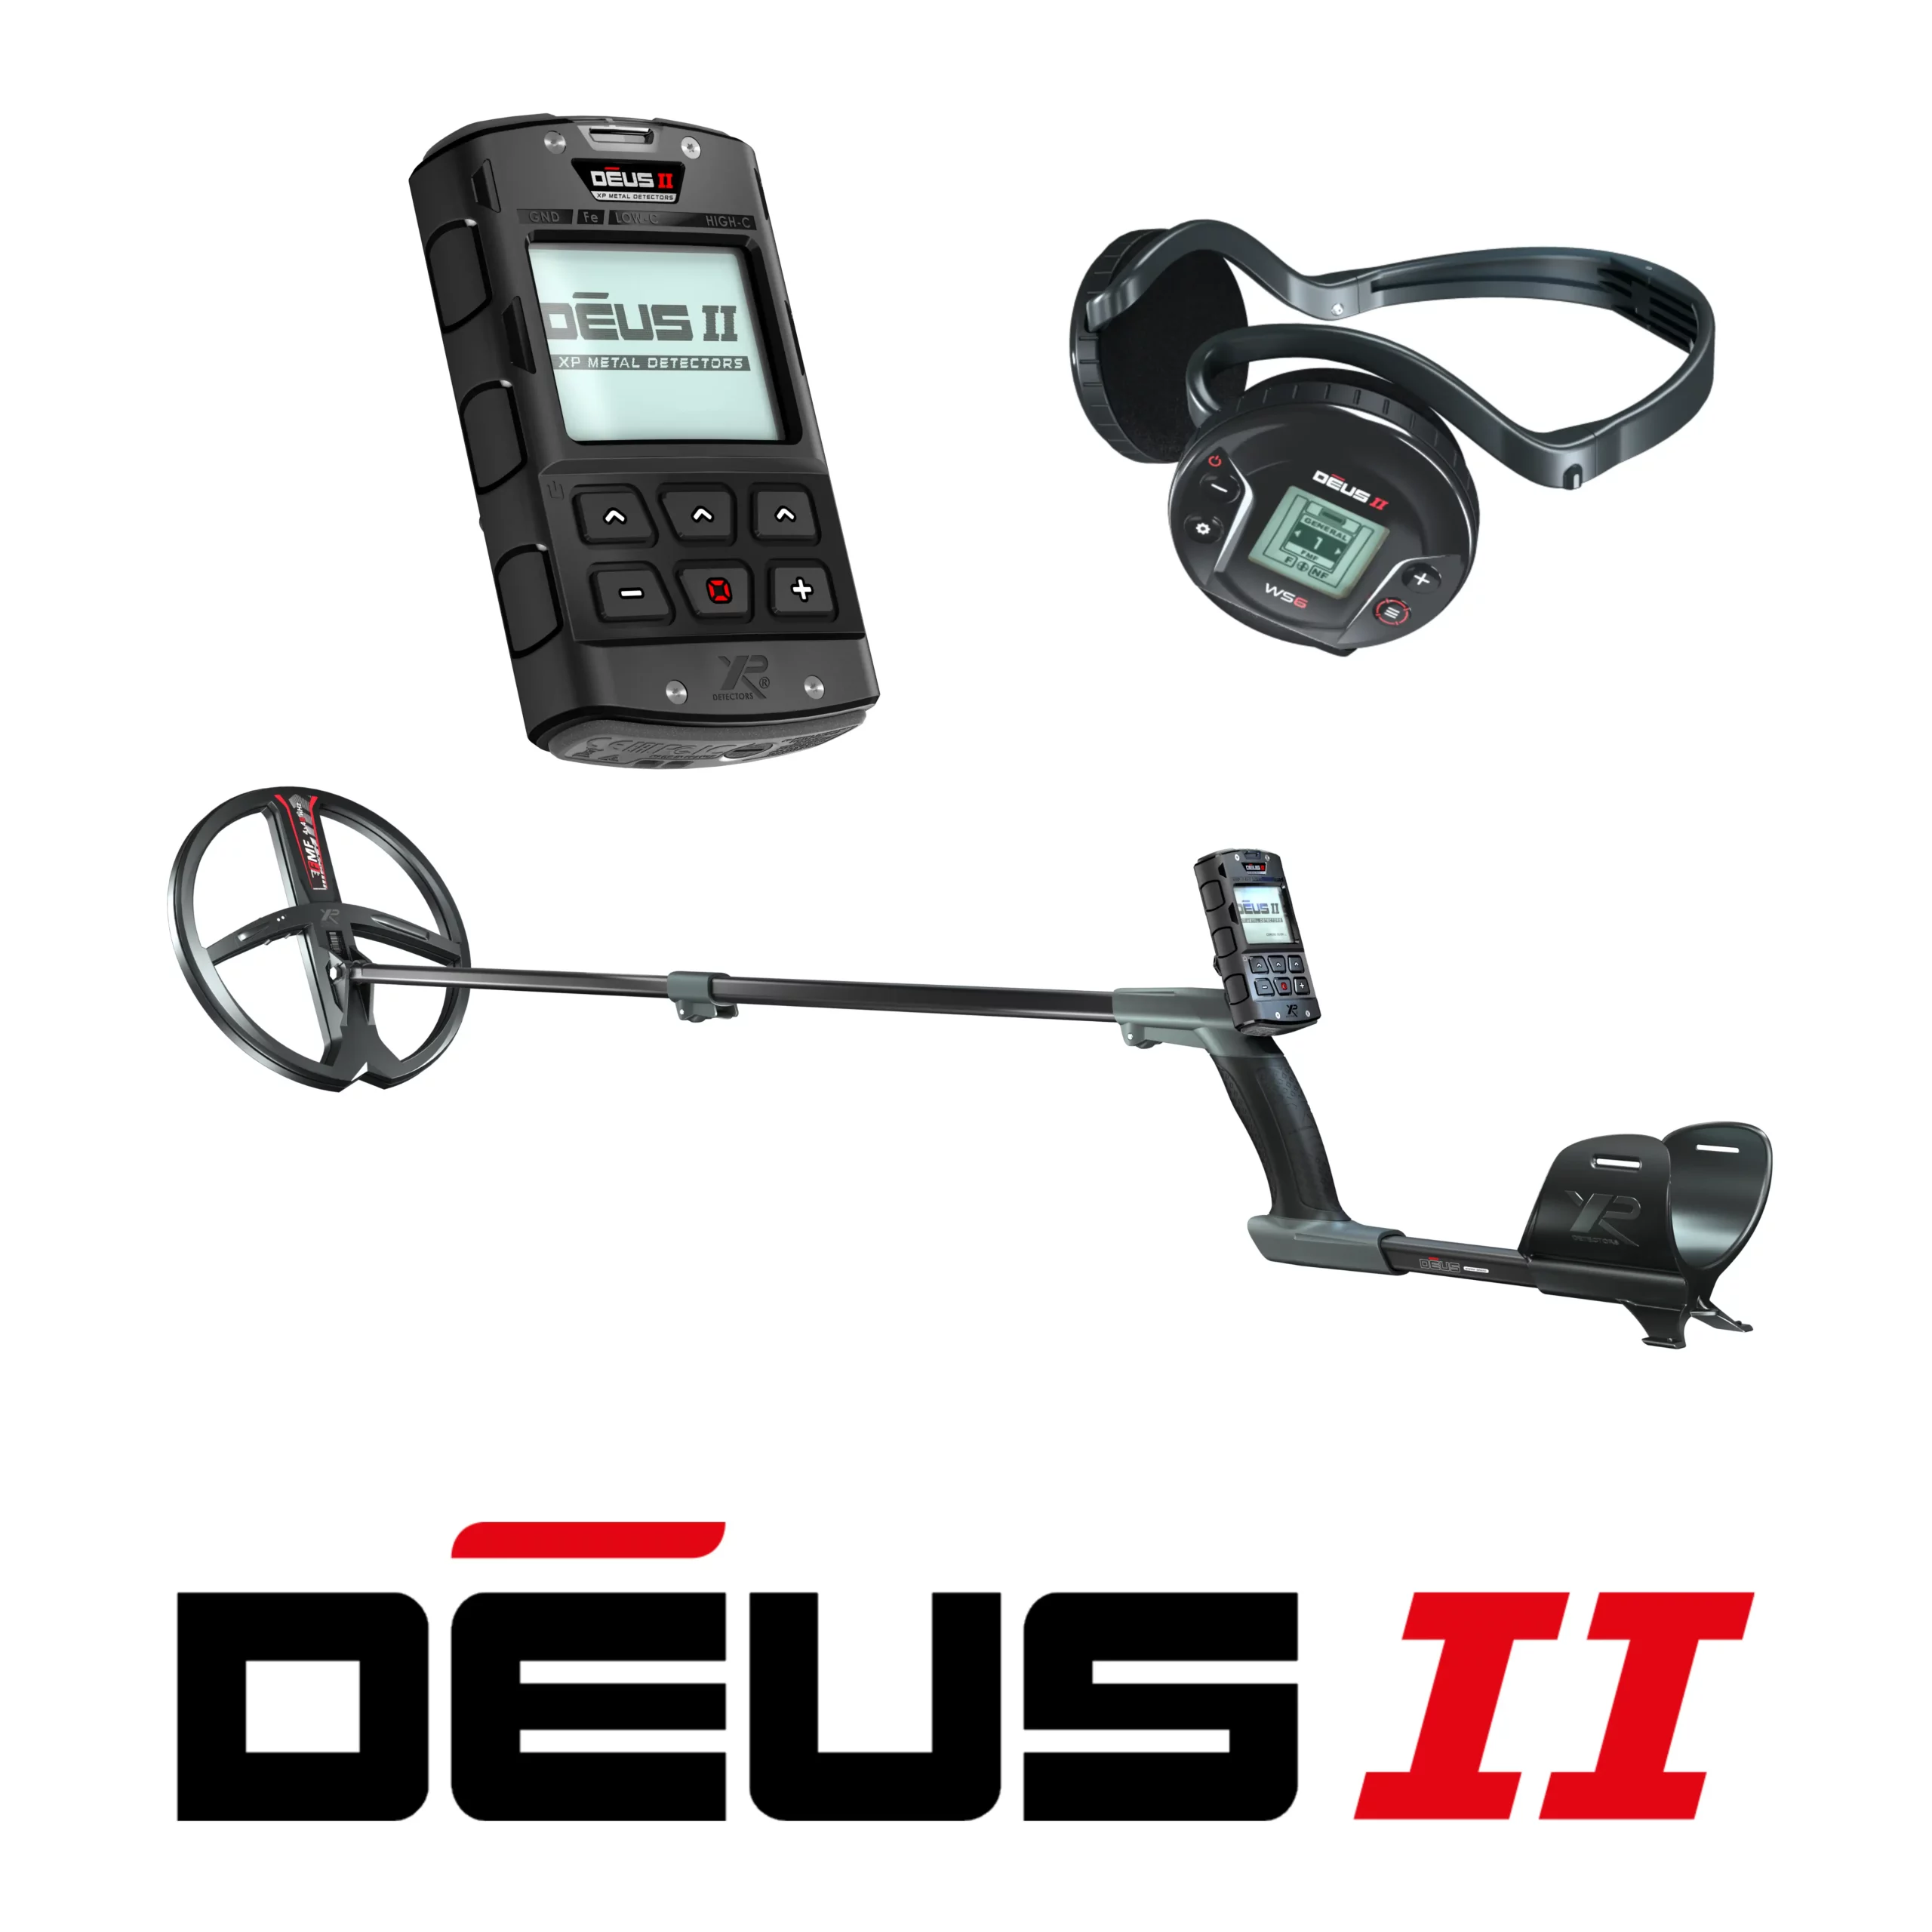 XP Deus II with 11″ Multi-Frequency Coil and Wireless Headphones